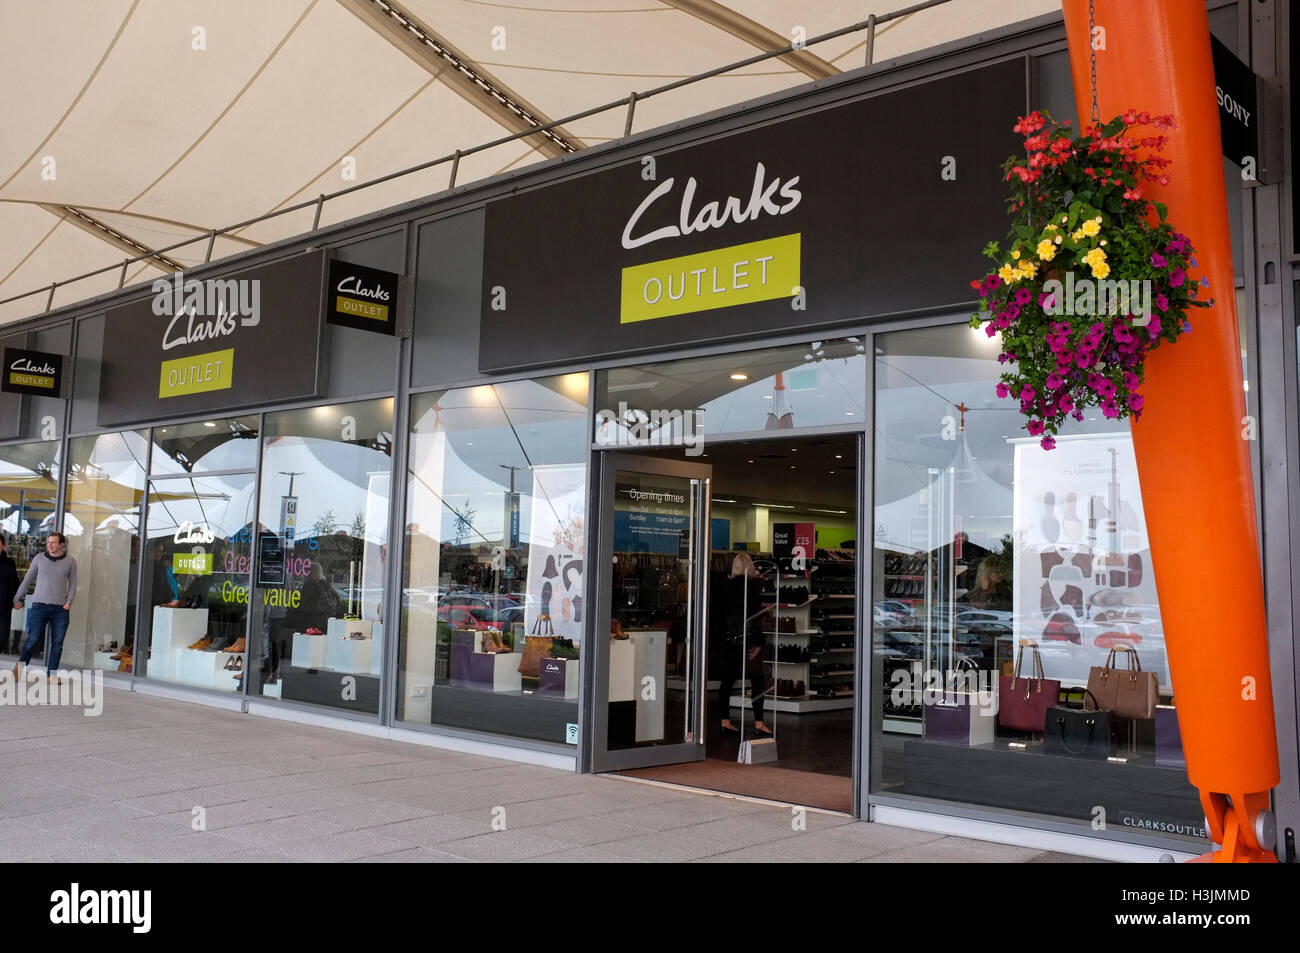 clarks shoes discount store